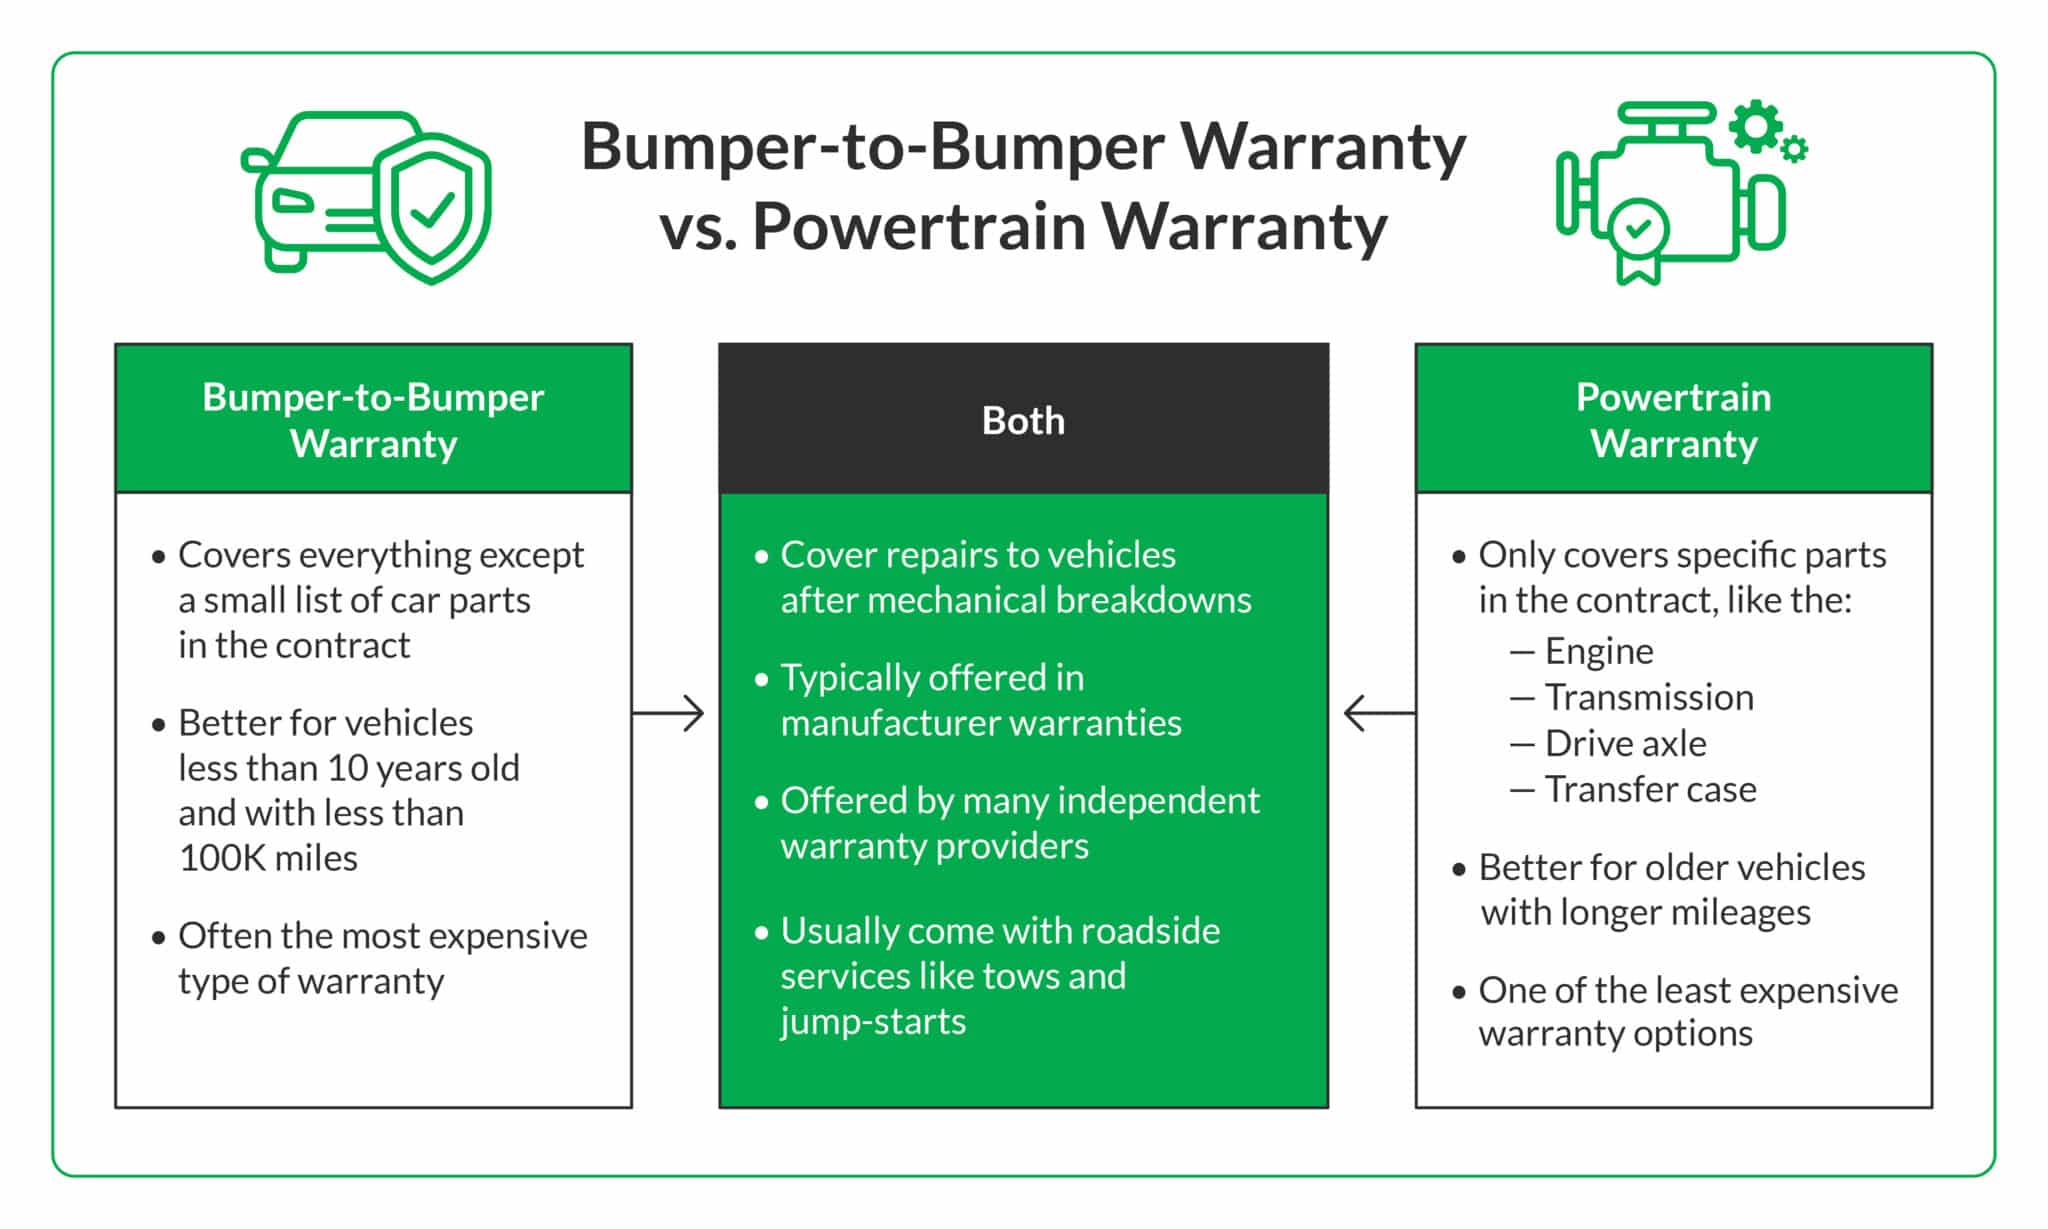 Table that marks the major differences and similarities between bumper-to-bumper and powertrain warranties